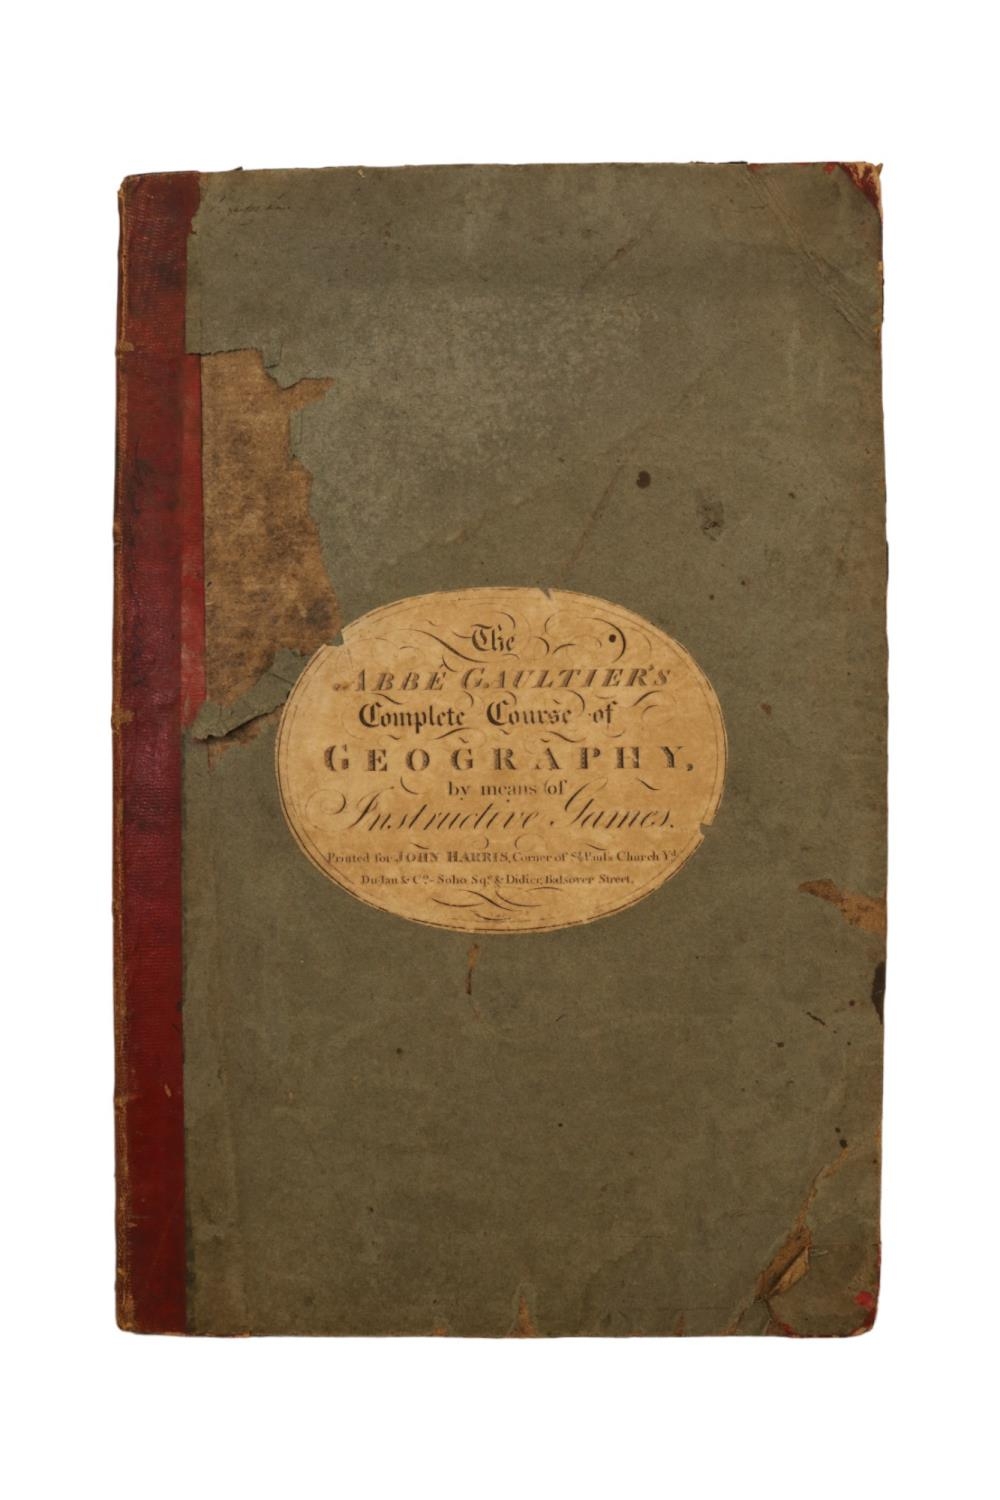 The Abbe Gaultier's Complete course of Geography by Means of Instructive Games Printed for John